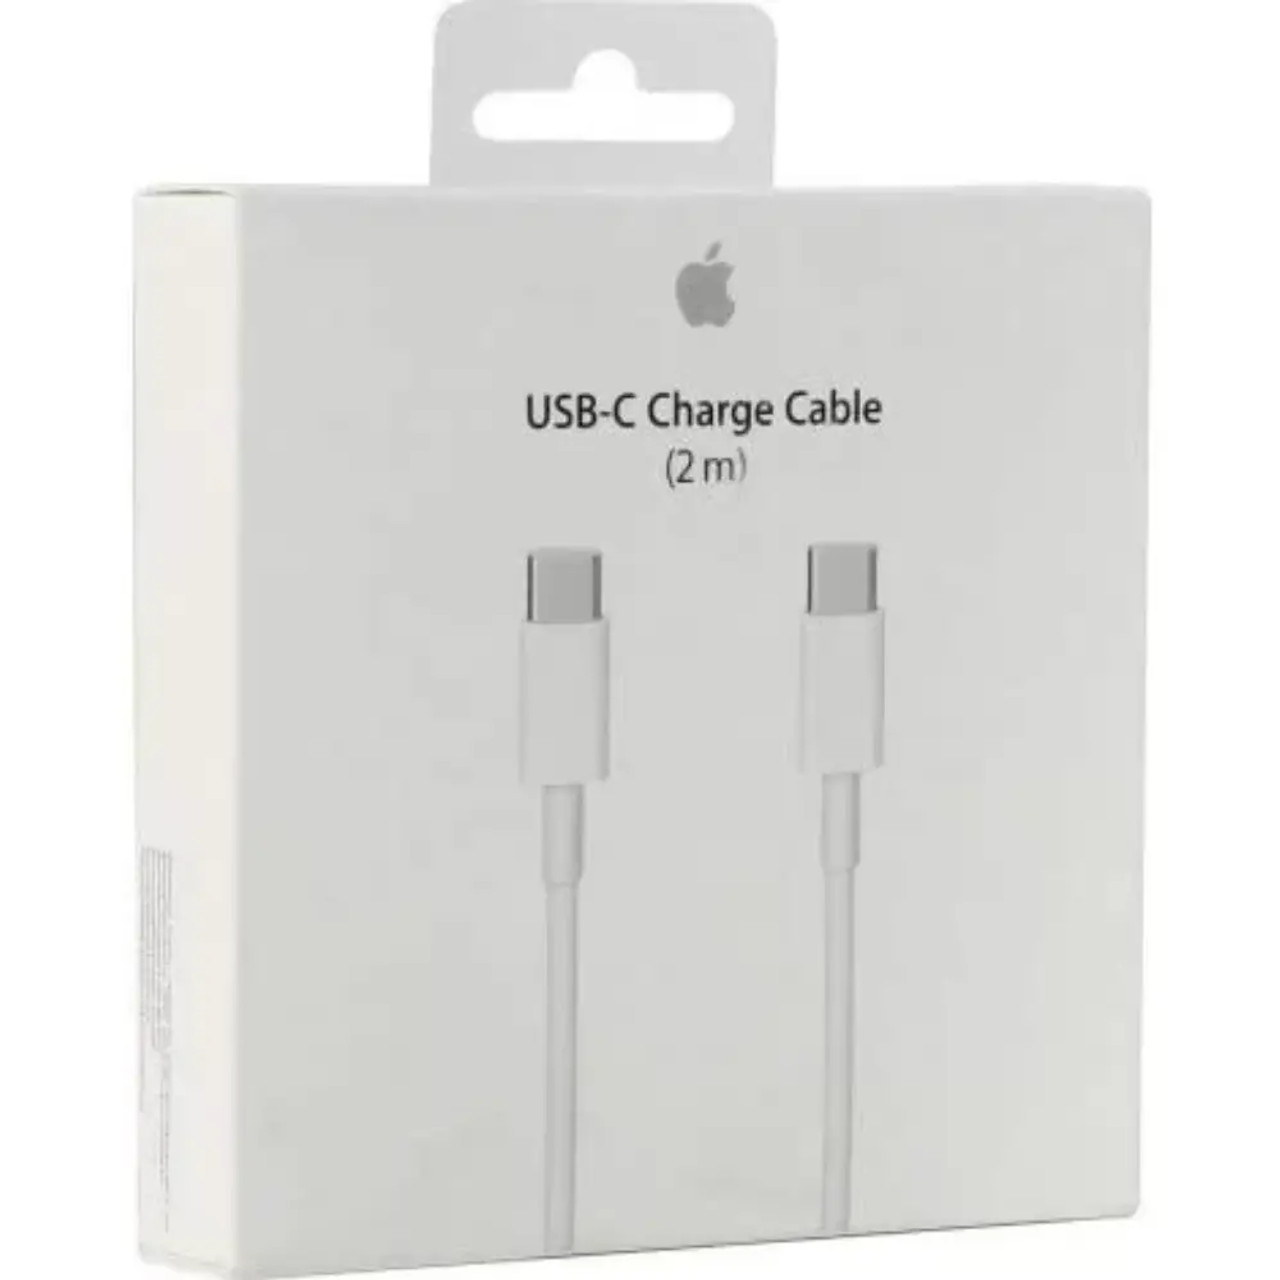 Apple USB C Charge Cable 2m, MLL82ZM-A, AYOUB COMPUTERS